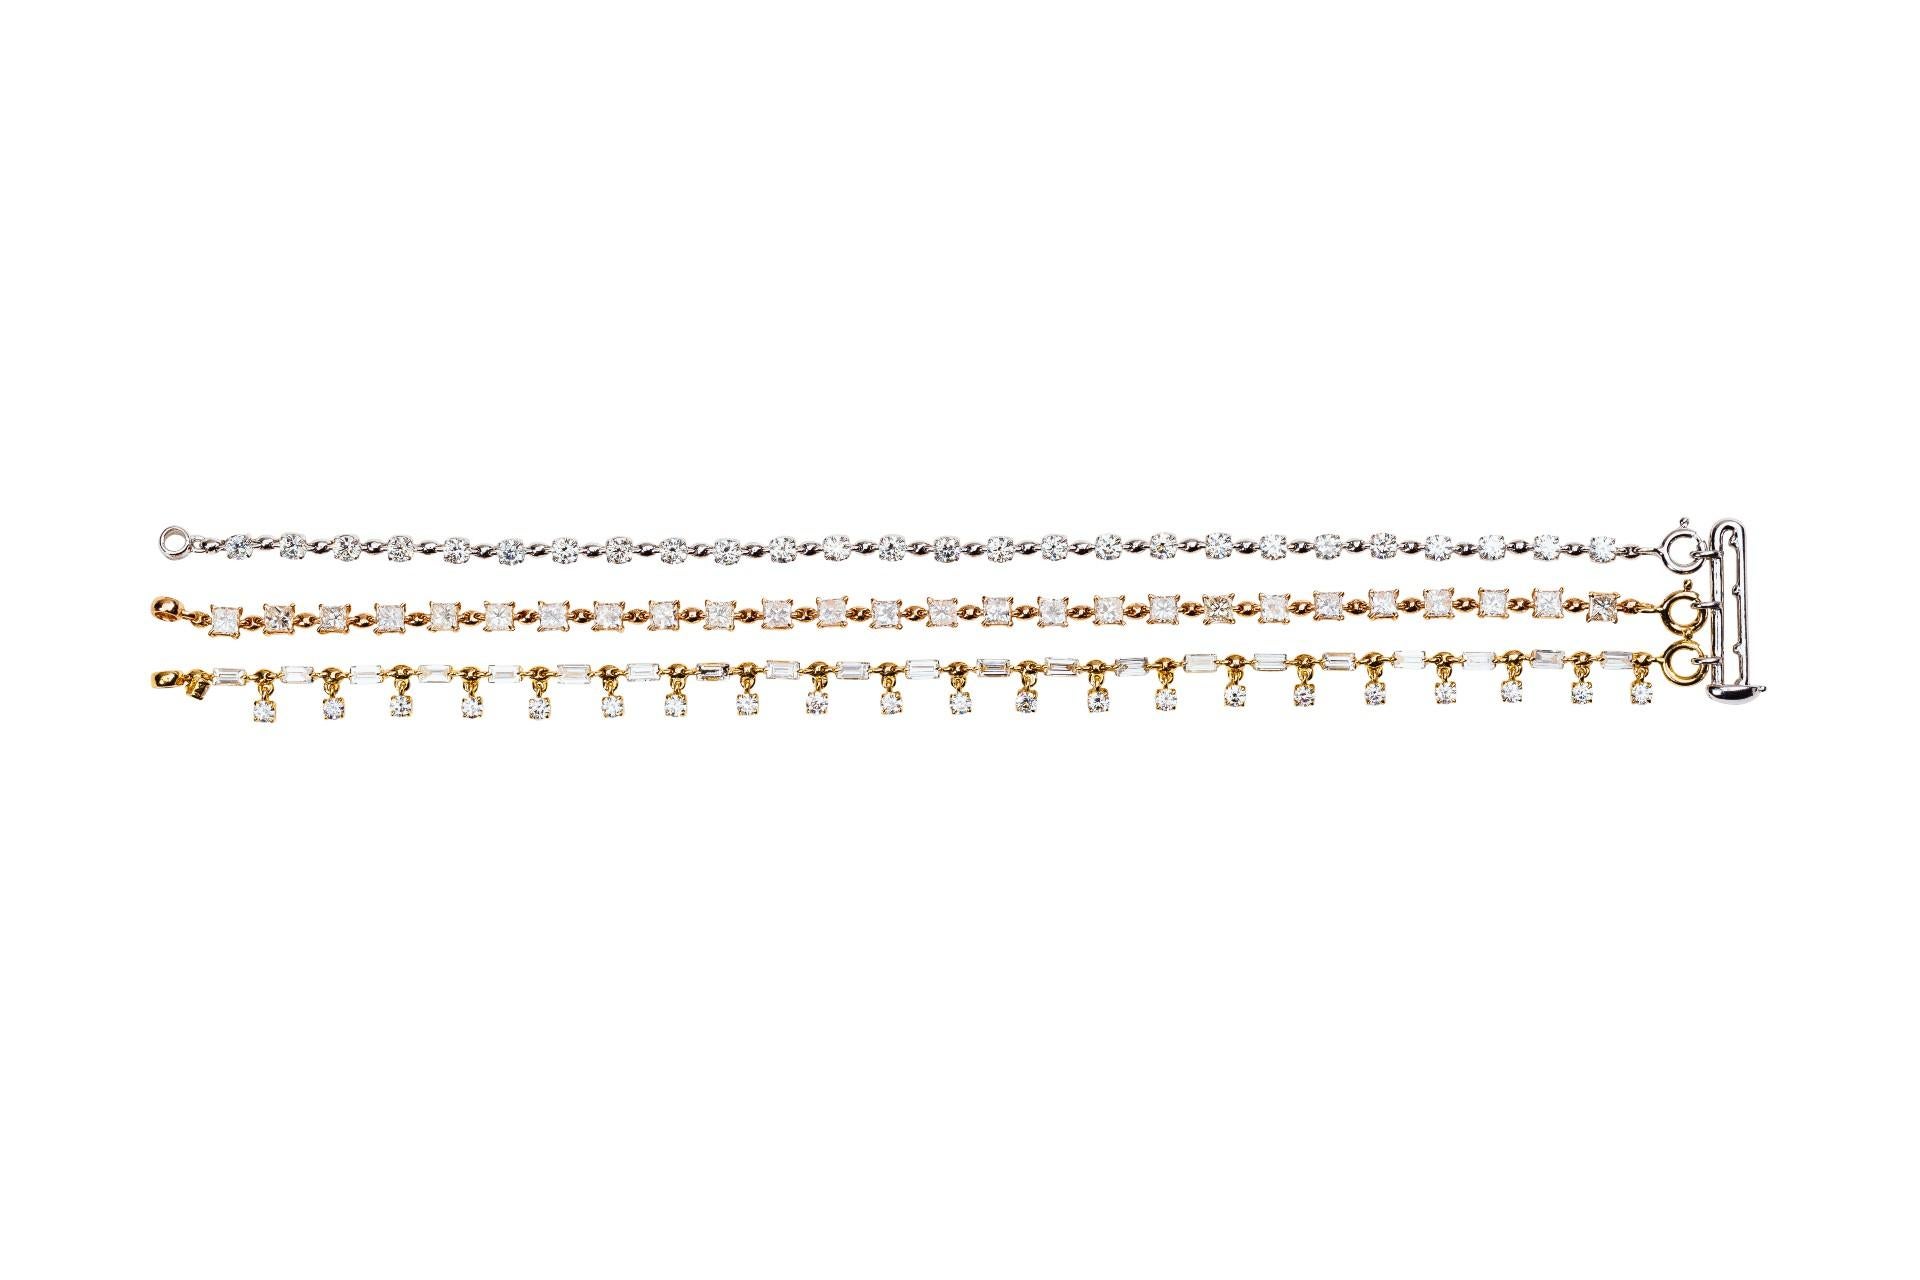 Trio Strand Gold and Diamond Bracelet by Made by Malyia

Glinting with white, rose and yellow gold, this delicate-yet-distinct trio of diamond bracelets may be worn stacked or separately. Good times all around. (3 row bracelet with spring clasp.